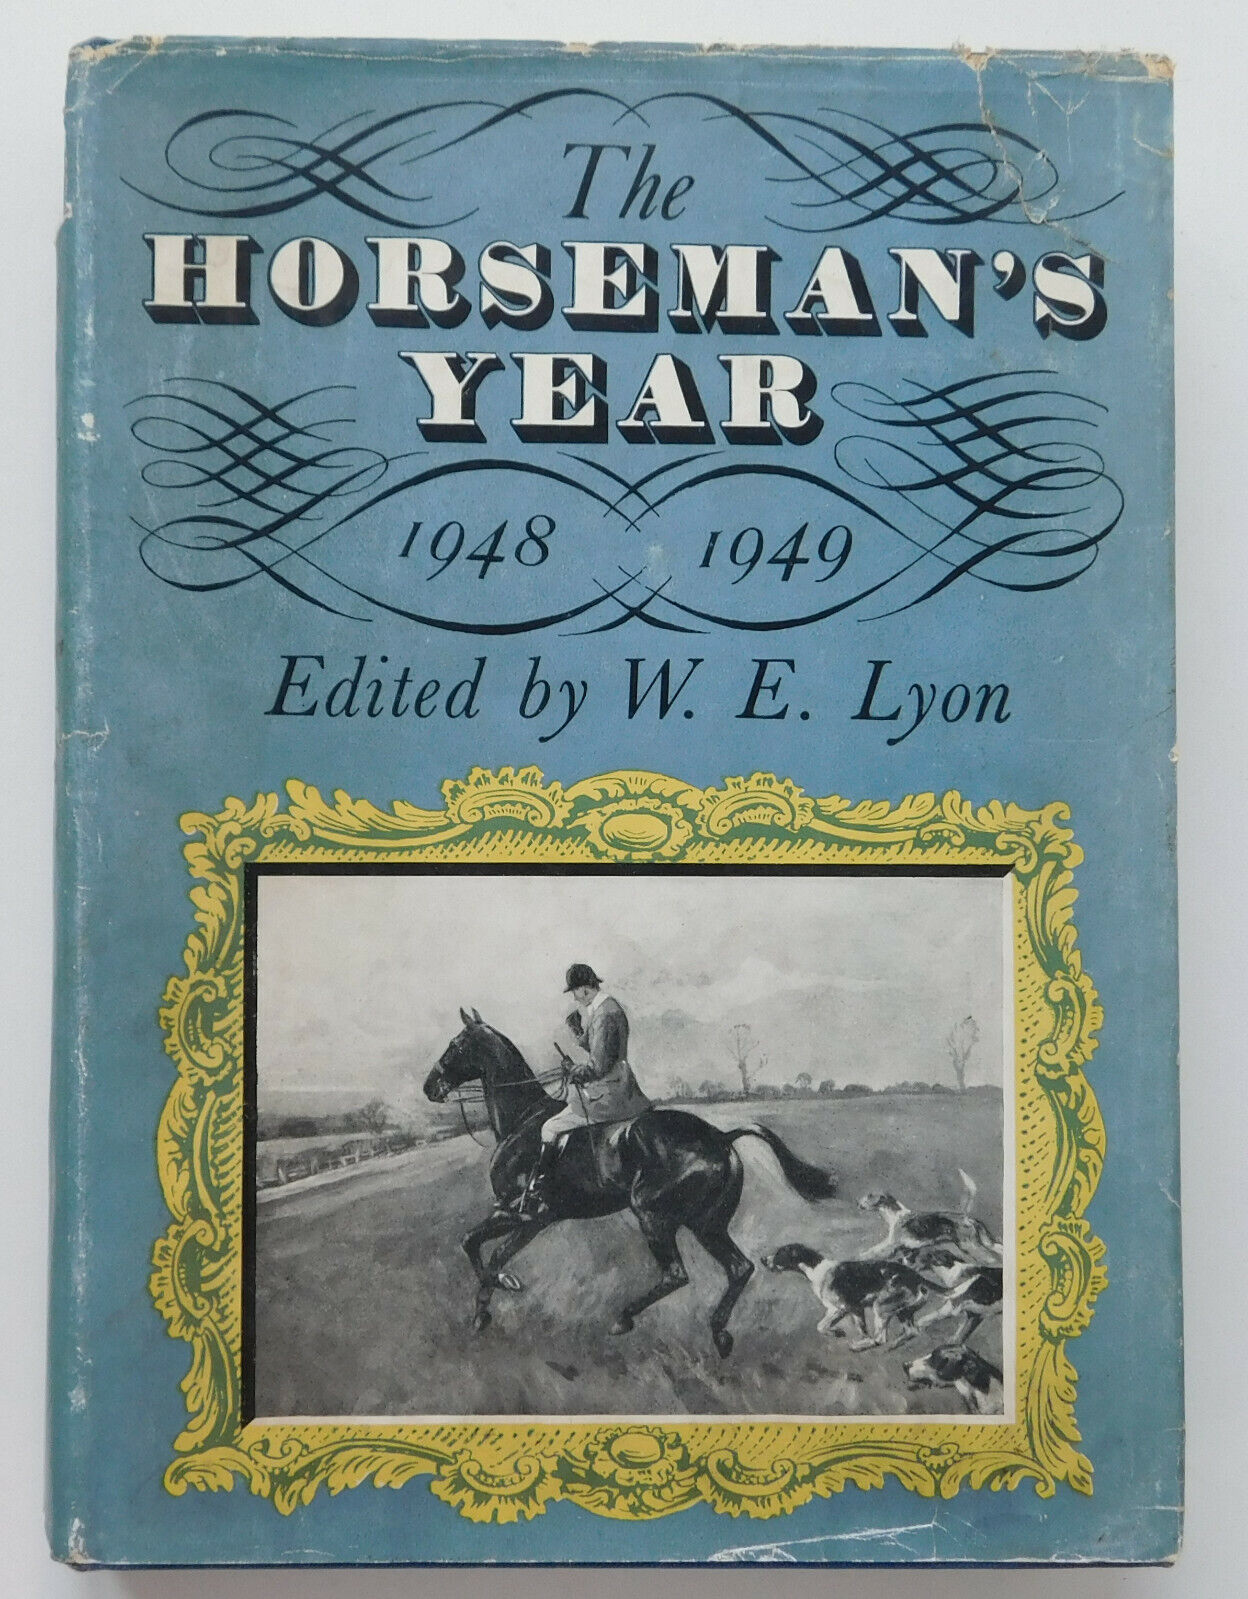 The Horseman\'s Year book 1948 - 1949 equestrian horse racing riding ponies 1940s